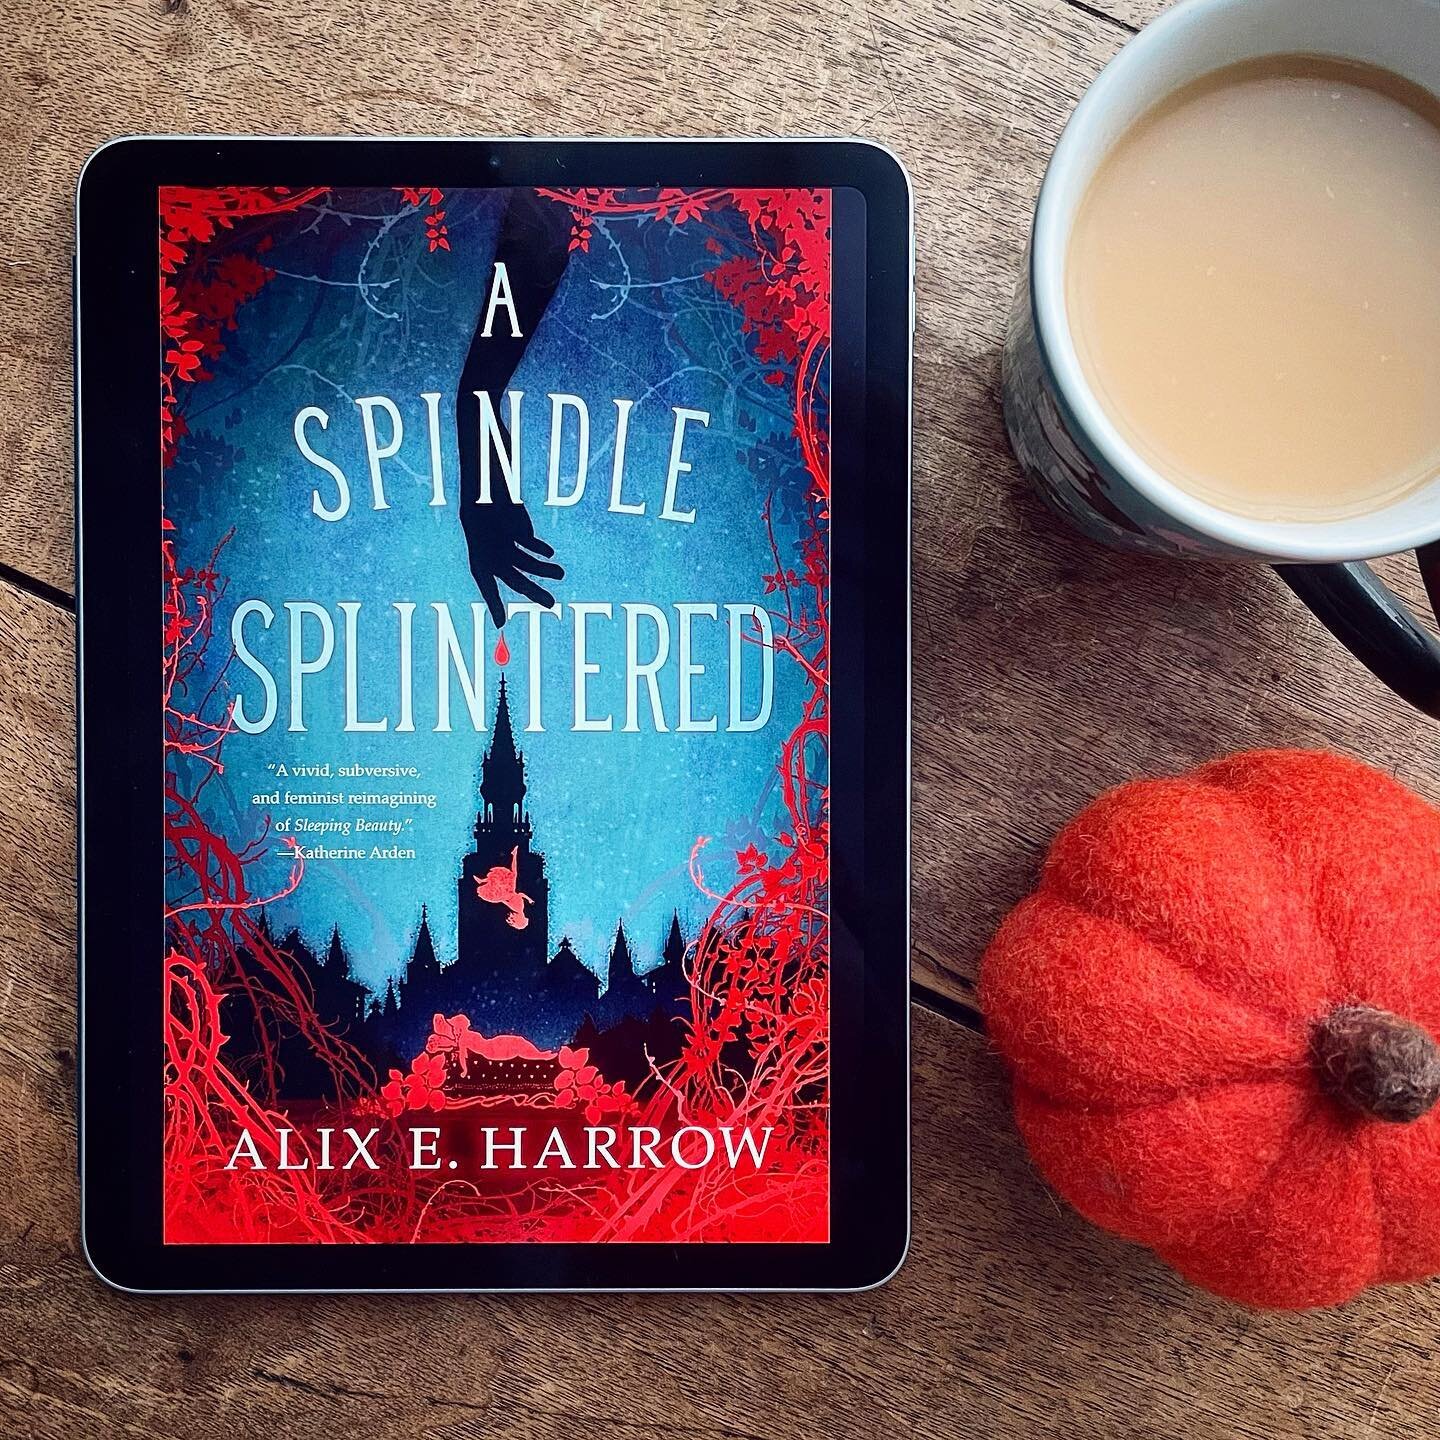 &ldquo;Romantic girls like Beauty and the Beast; vanilla girls like Cinderella; goth girls like Snow White. Only dying girls like Sleeping Beauty.&rdquo; 
.
I recently read Alix E. Harrow&rsquo;s novella &lsquo;A Spindle Splintered&rsquo; as prep wor